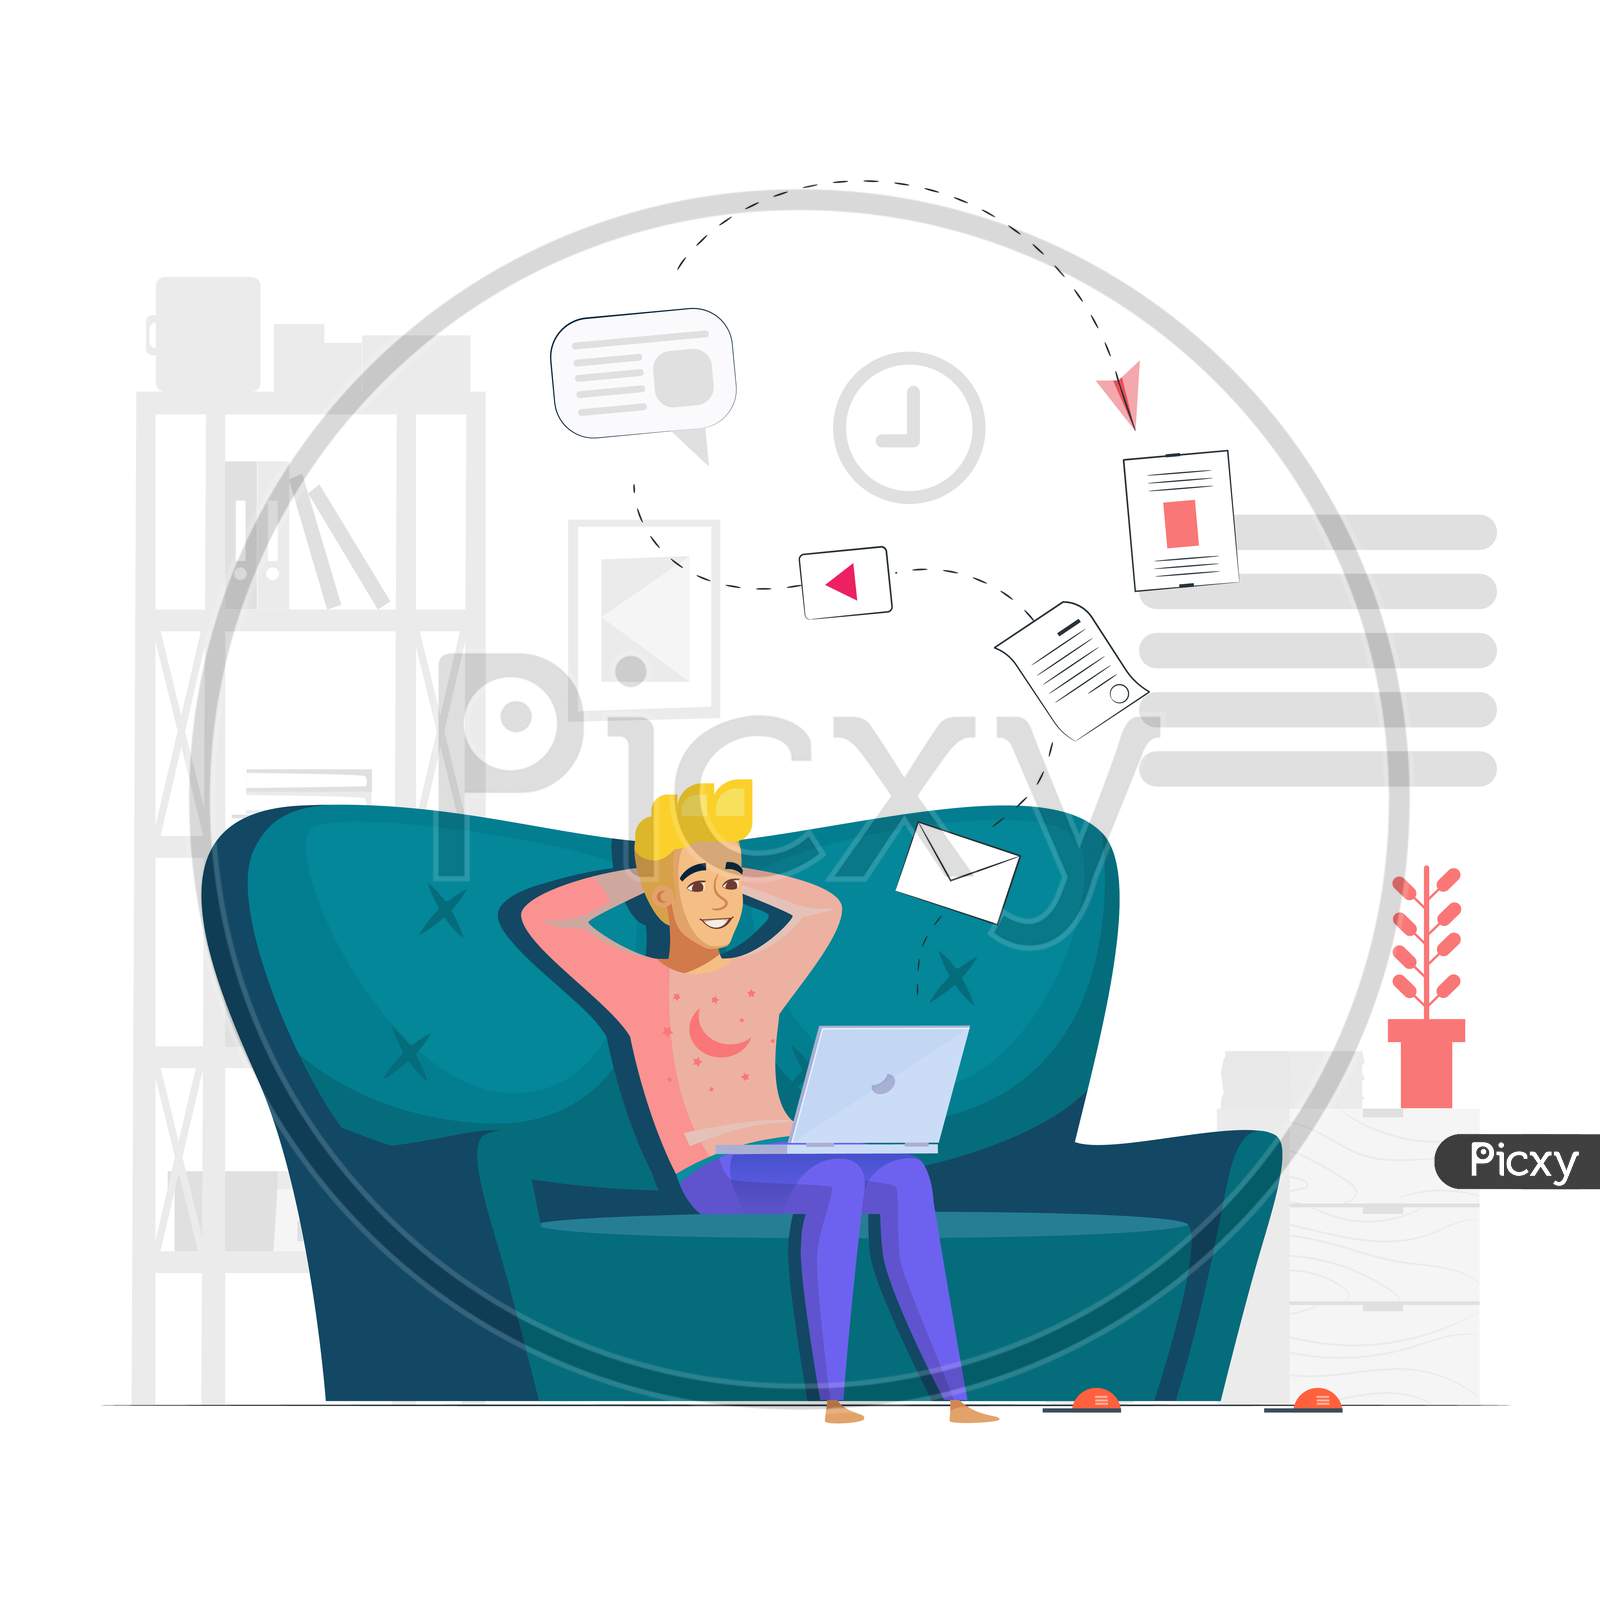 Boy working from home, telecommuting, mobile work during coronavirus pandemic, vector illustration